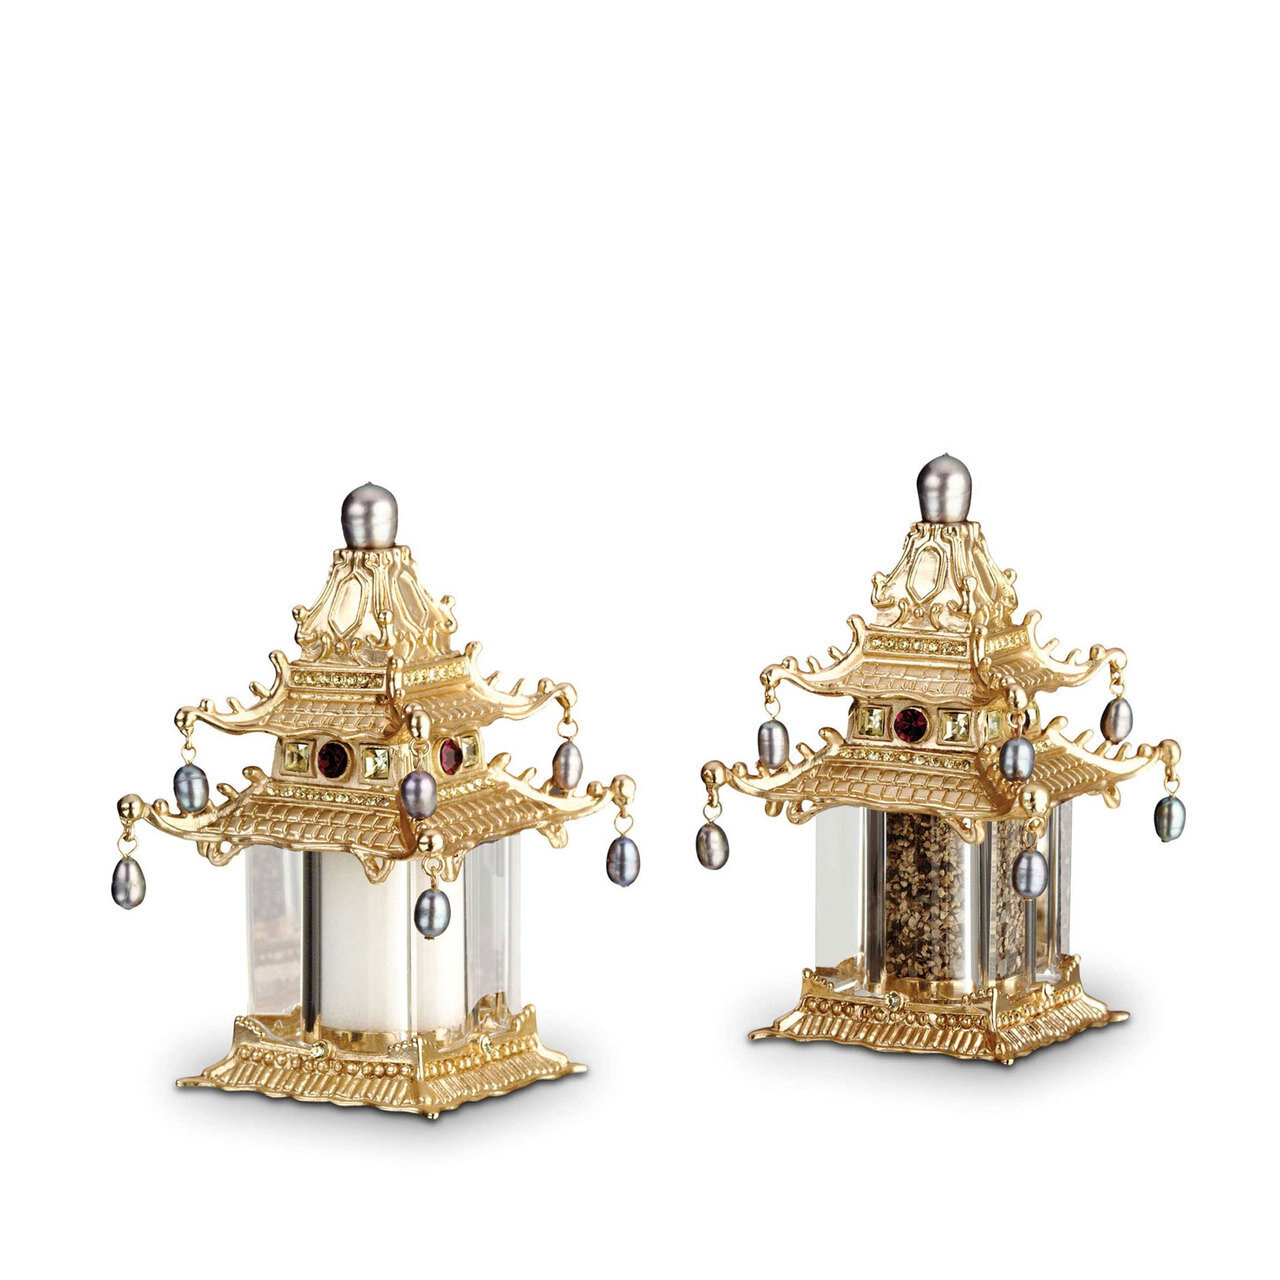 L'Objet Gold with Fresh Water Pearls with Yellow Crystals Salt and Pepper Shaker Pagoda Spice Jewels